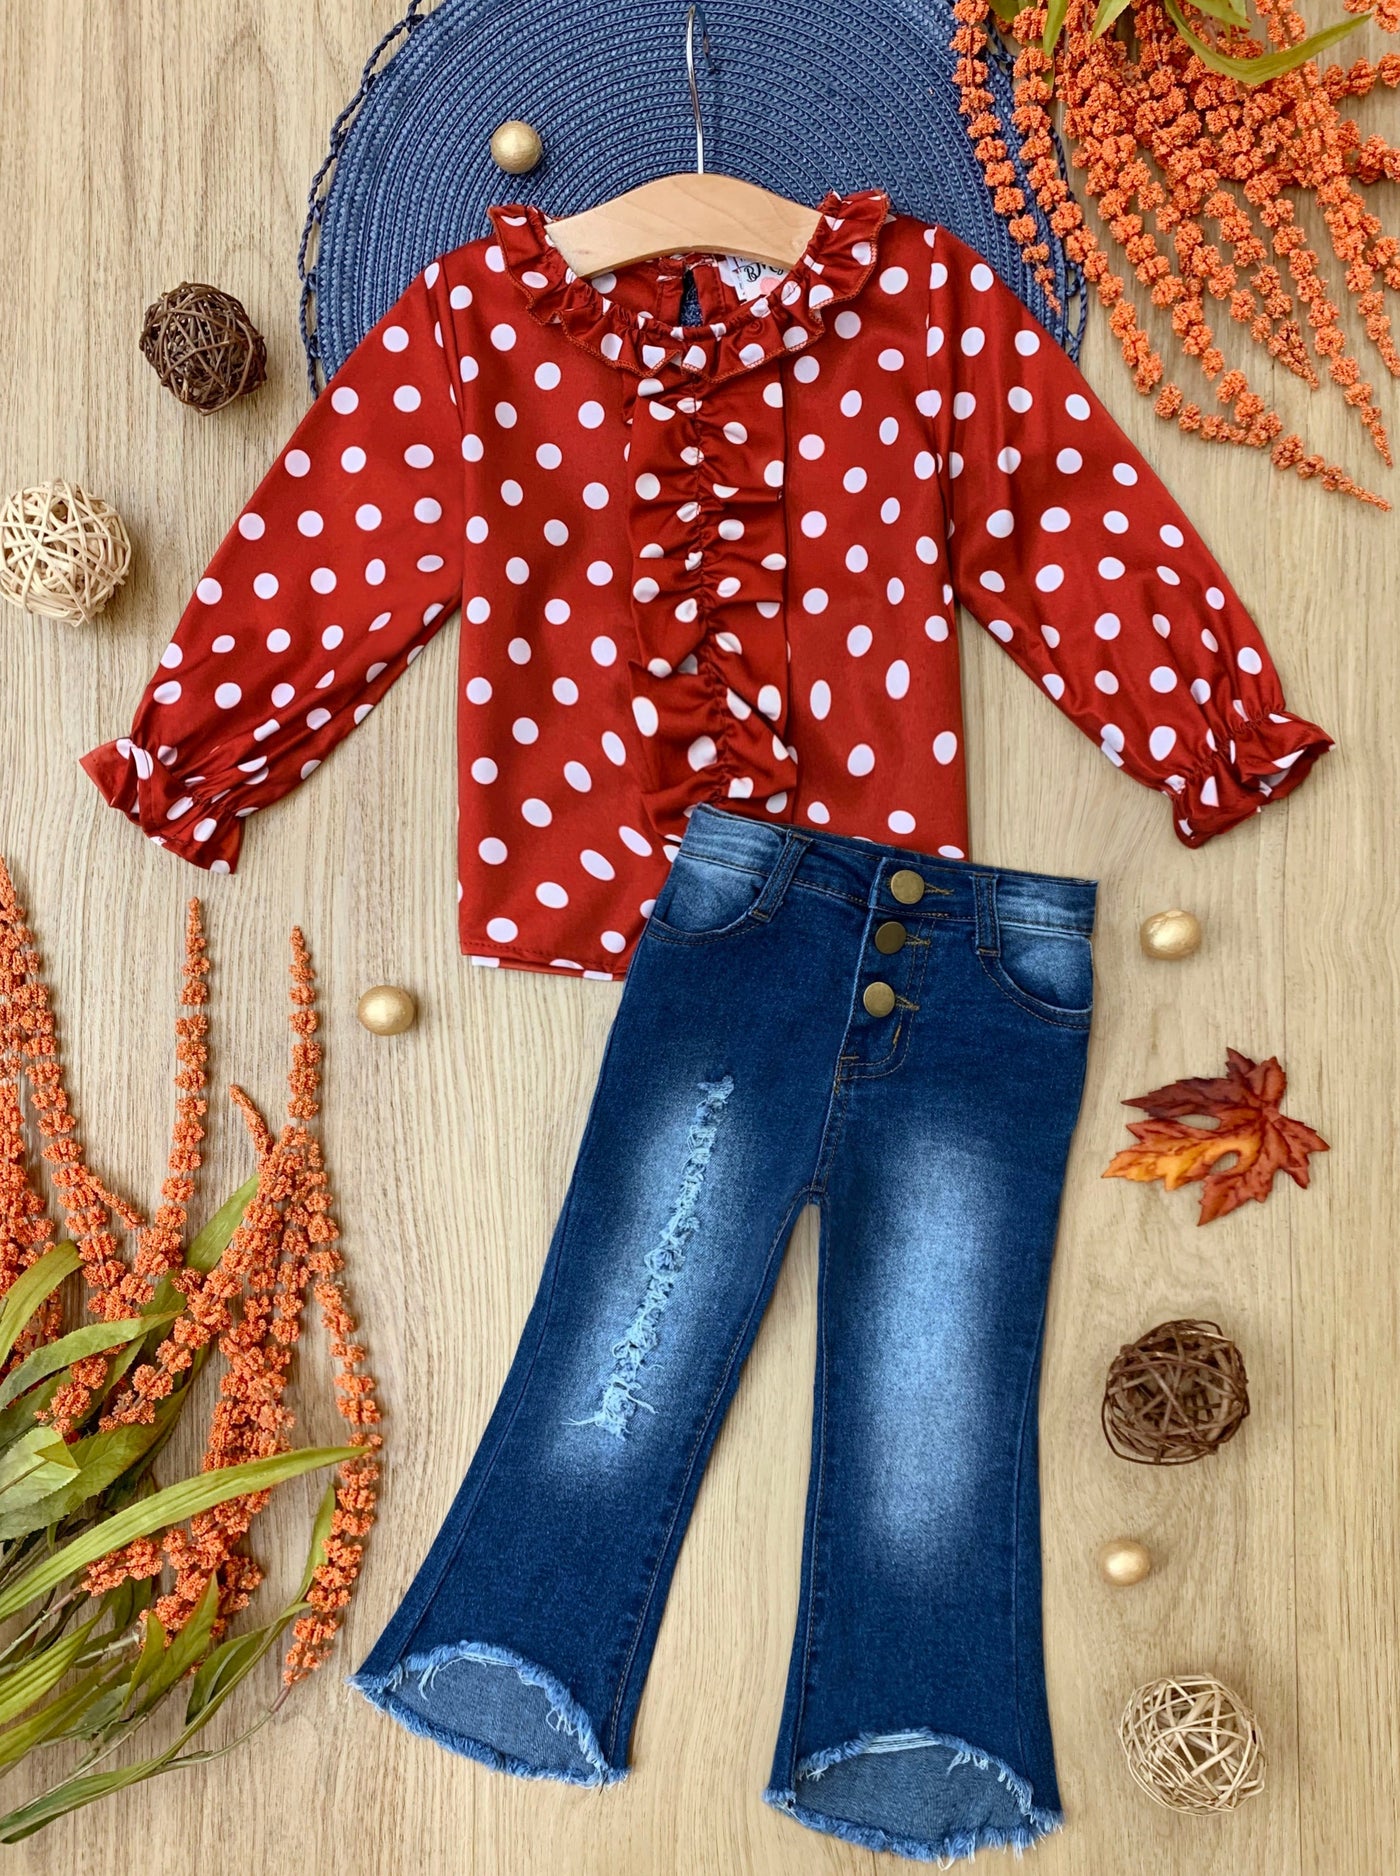 Girls Fall Clothes | Polka Dot Top and High-Waisted Jeans Set 